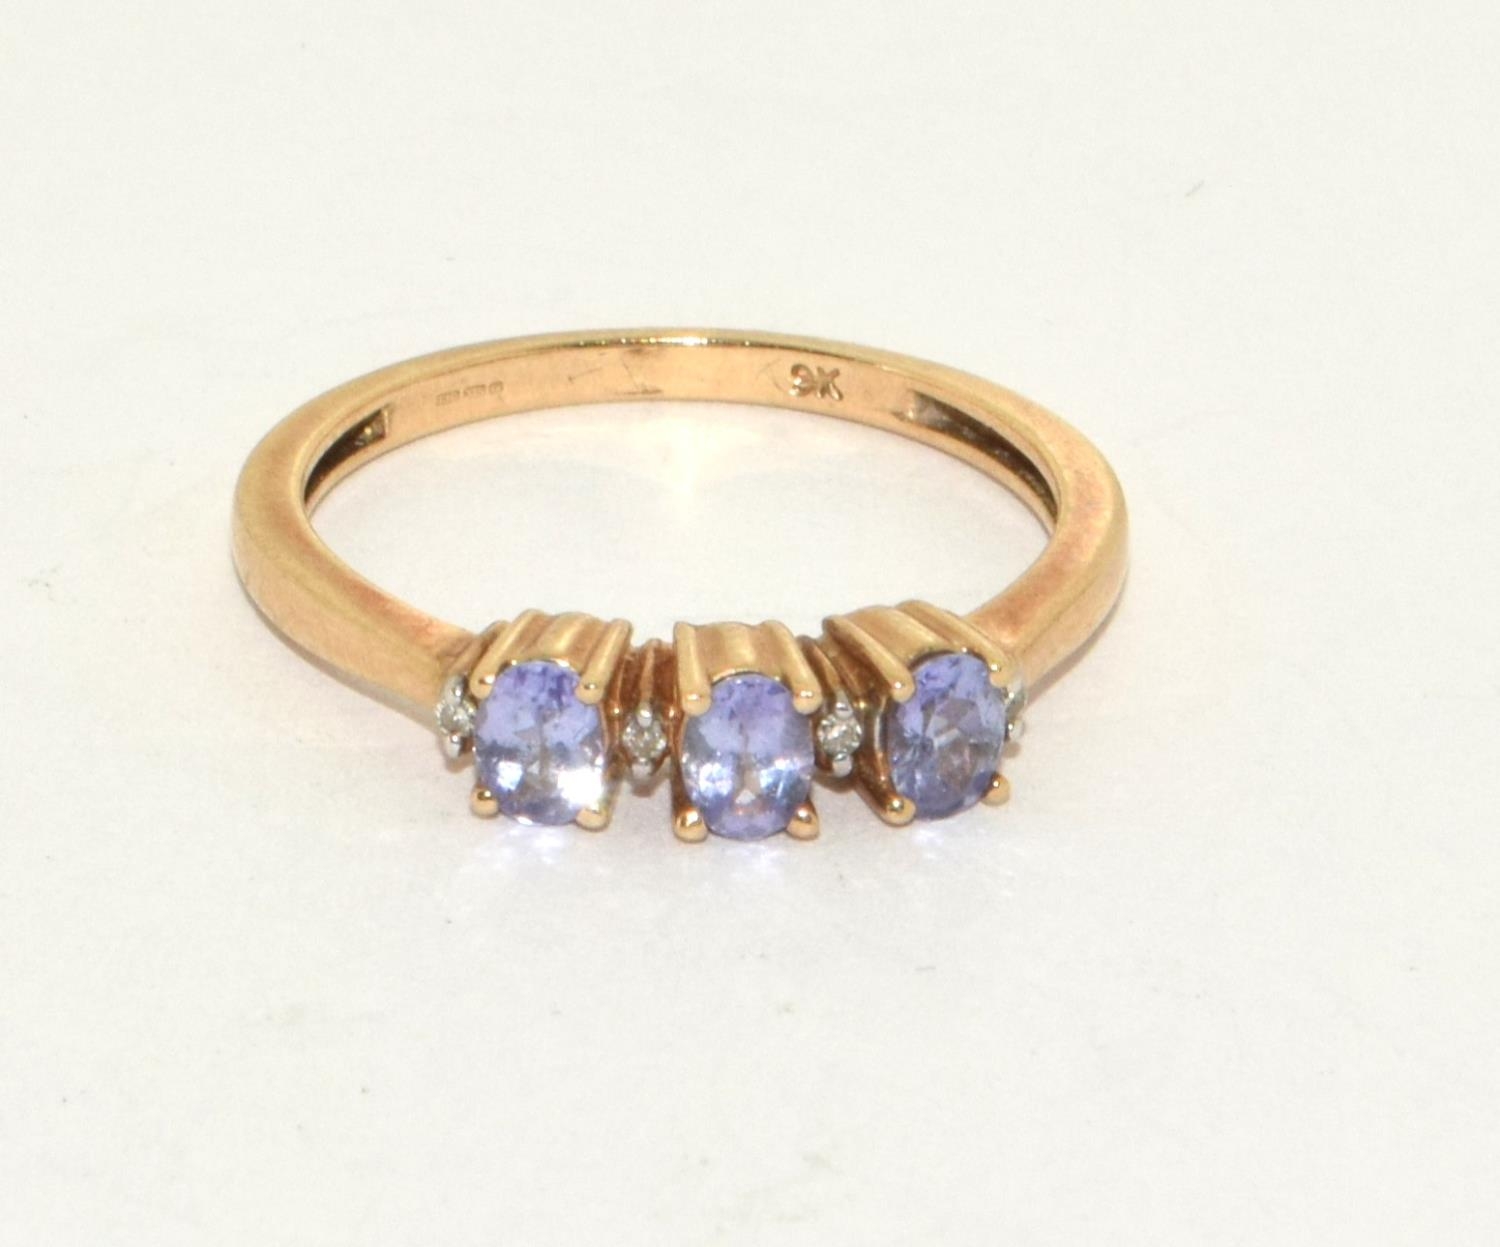 9ct gold ladies Diamond and Amethyst ring size O - Image 5 of 5